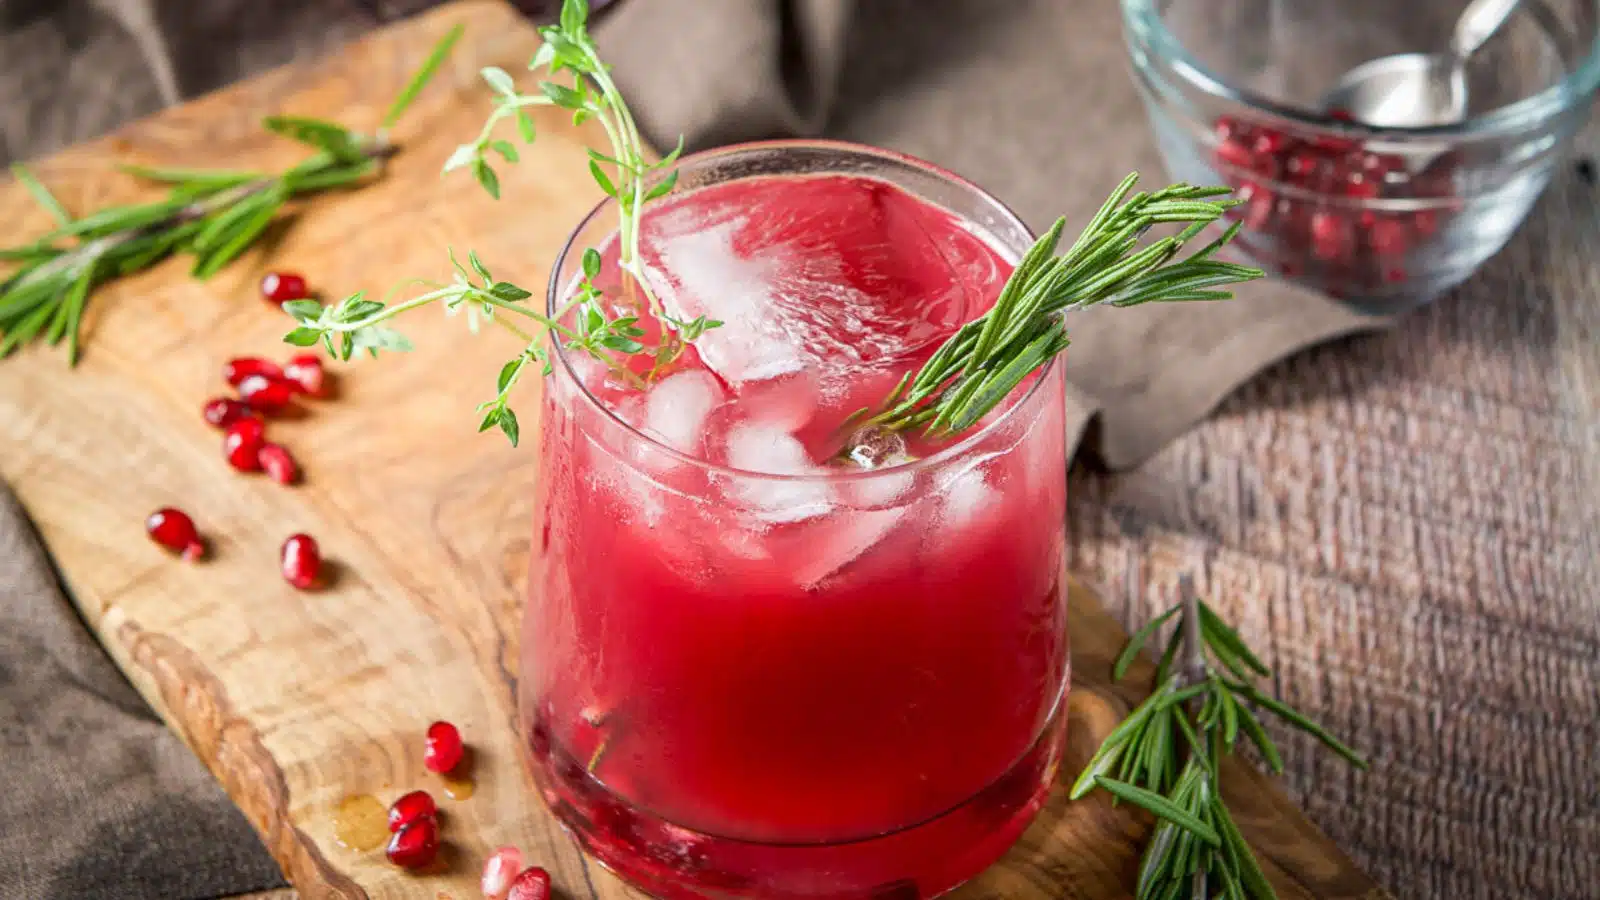 a board with rosemary sprigs and pomegranate seeds on it along with the red cocktail